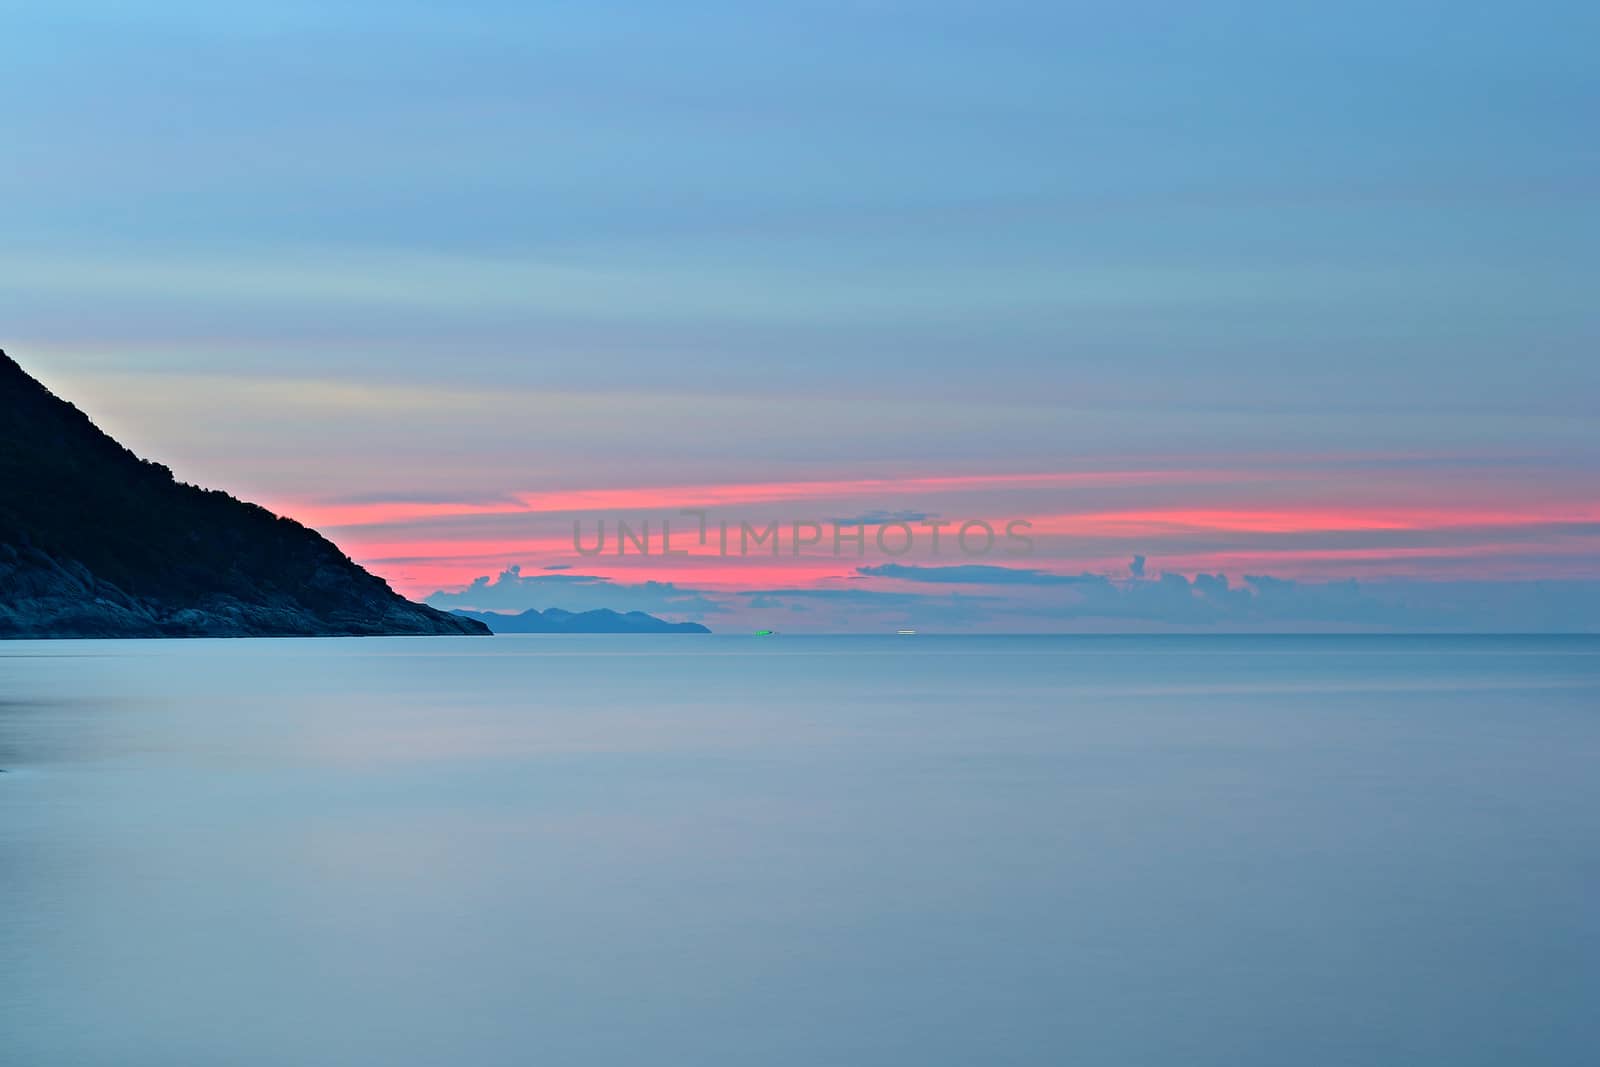 Vibrant colored sunset and blurred motion seascape at Ao Haad Khaud, Koh Phangan, Southern Thailand.